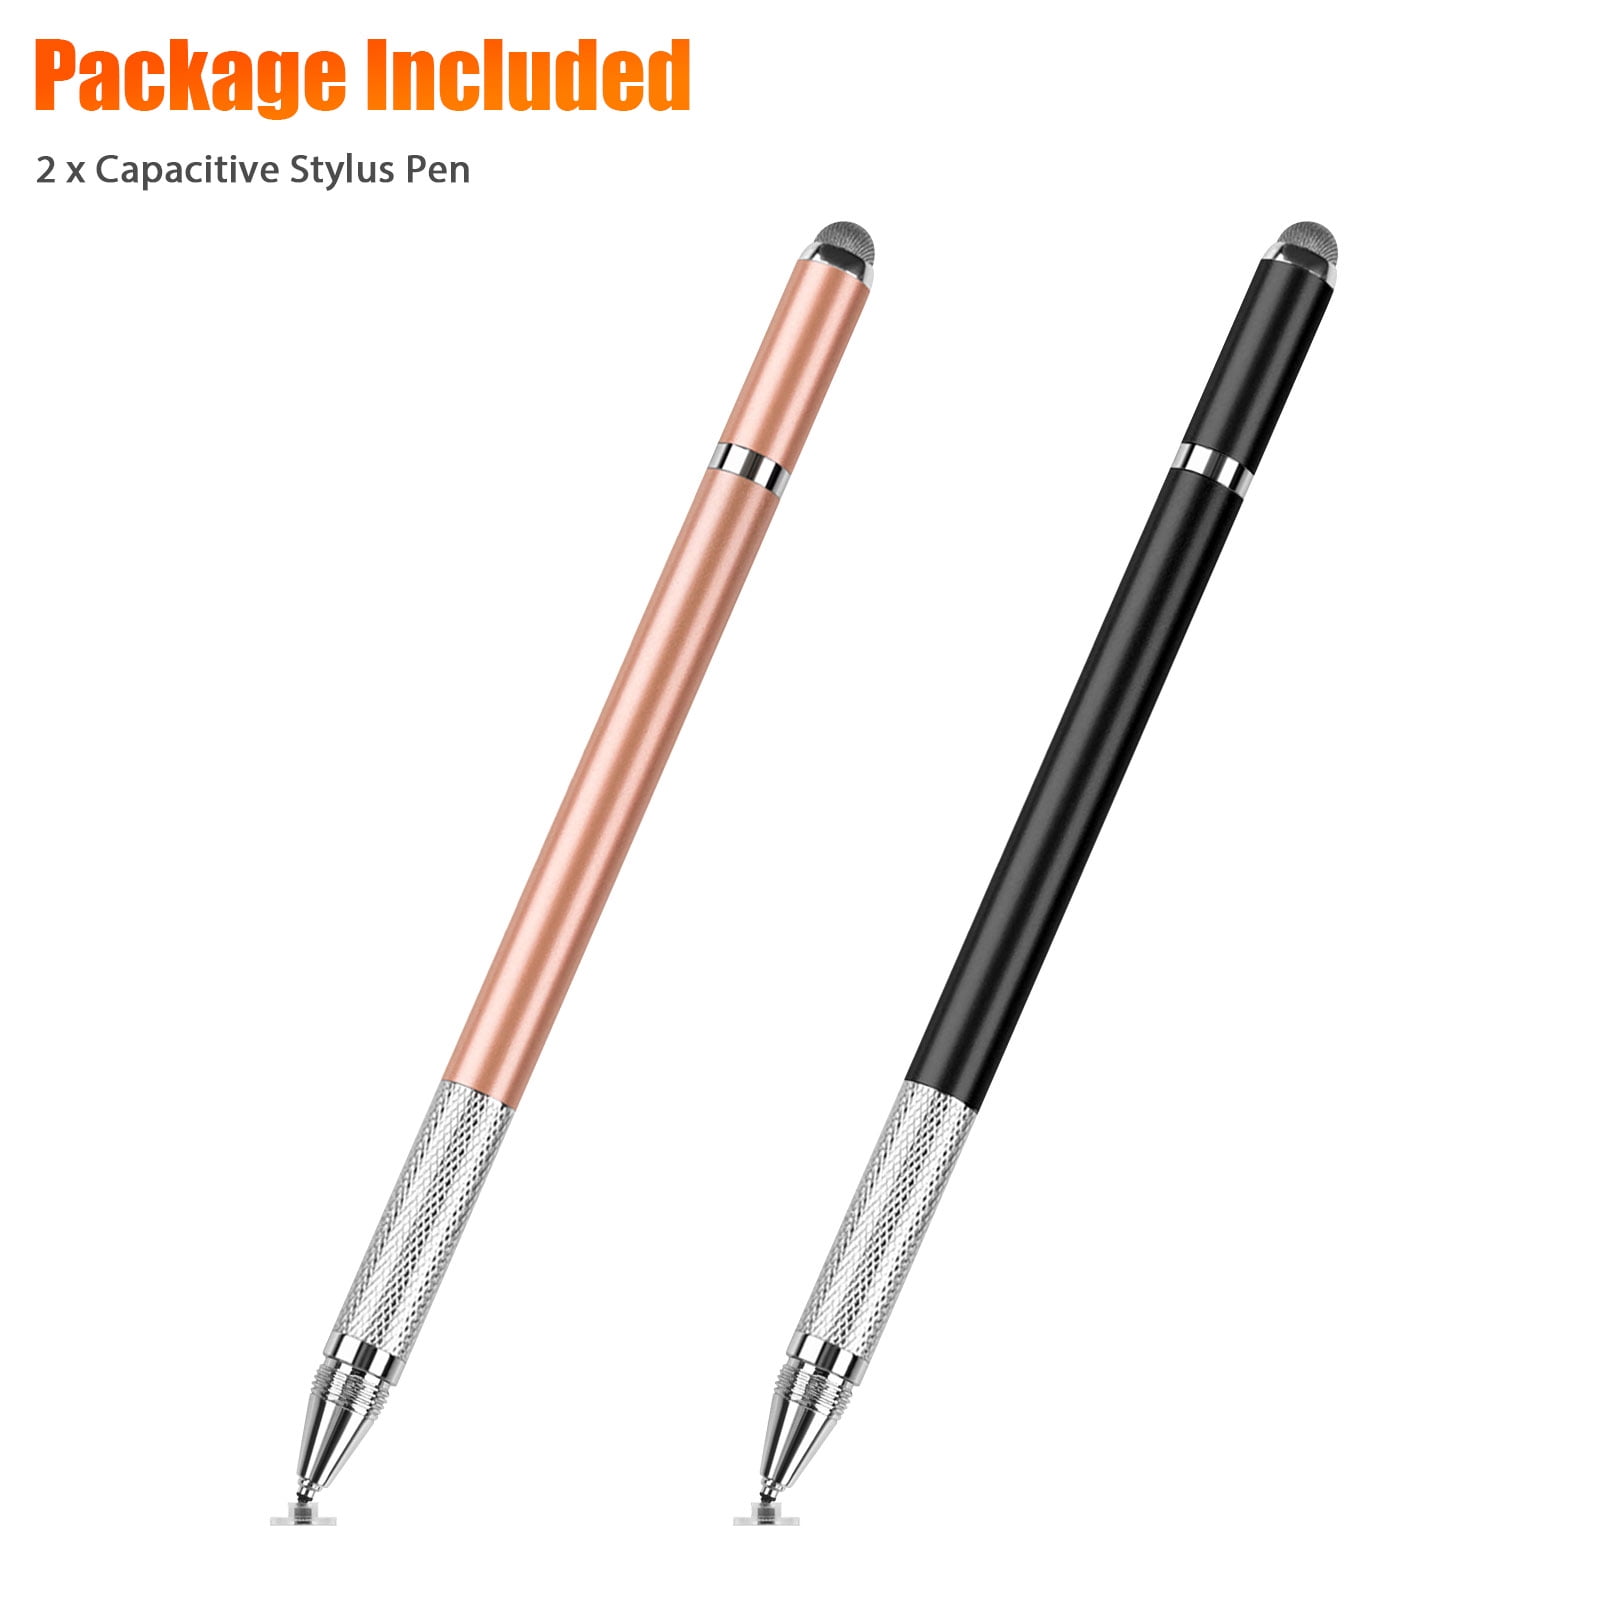 5pcs Different Color Pens For Note Taking, Ballpoint Pen Tip, Pen Holder  Type, For Phone Tablet Computer Capacitive, Office Stylus, Black Ink, Smart  T